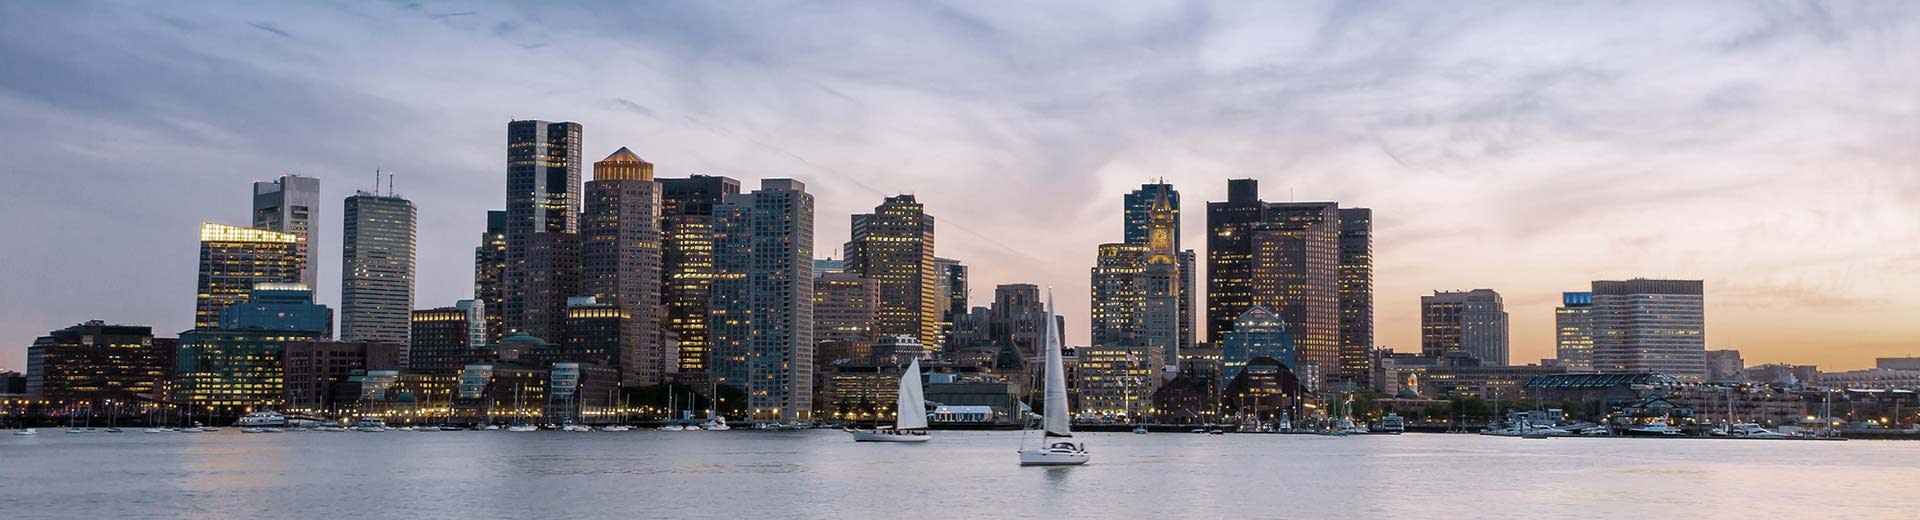 Panorama shot of the Boston business center at sunset from across the harbor.